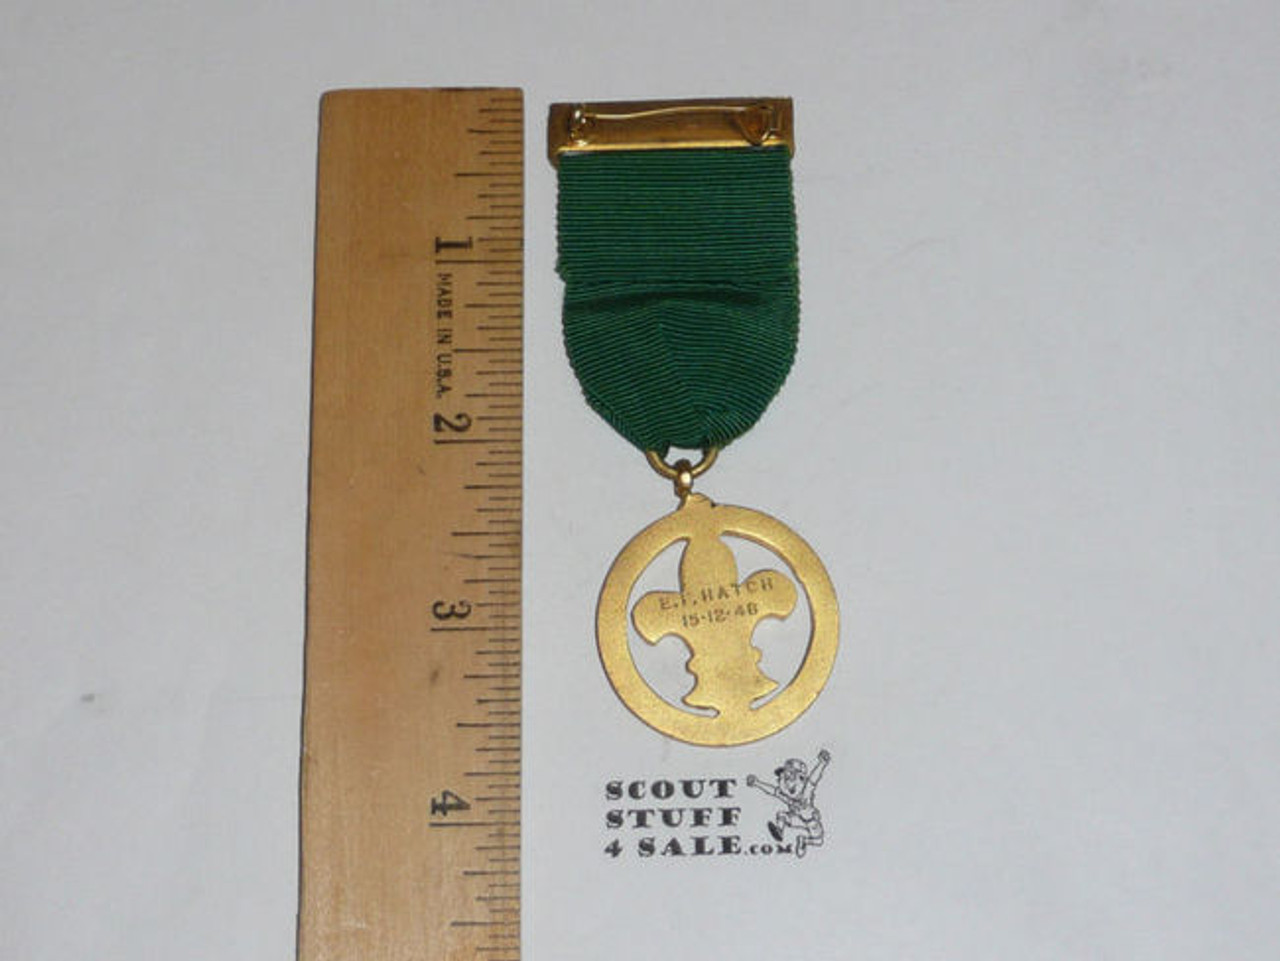 1948 Presented British Boy Scout Medal, FGPC27